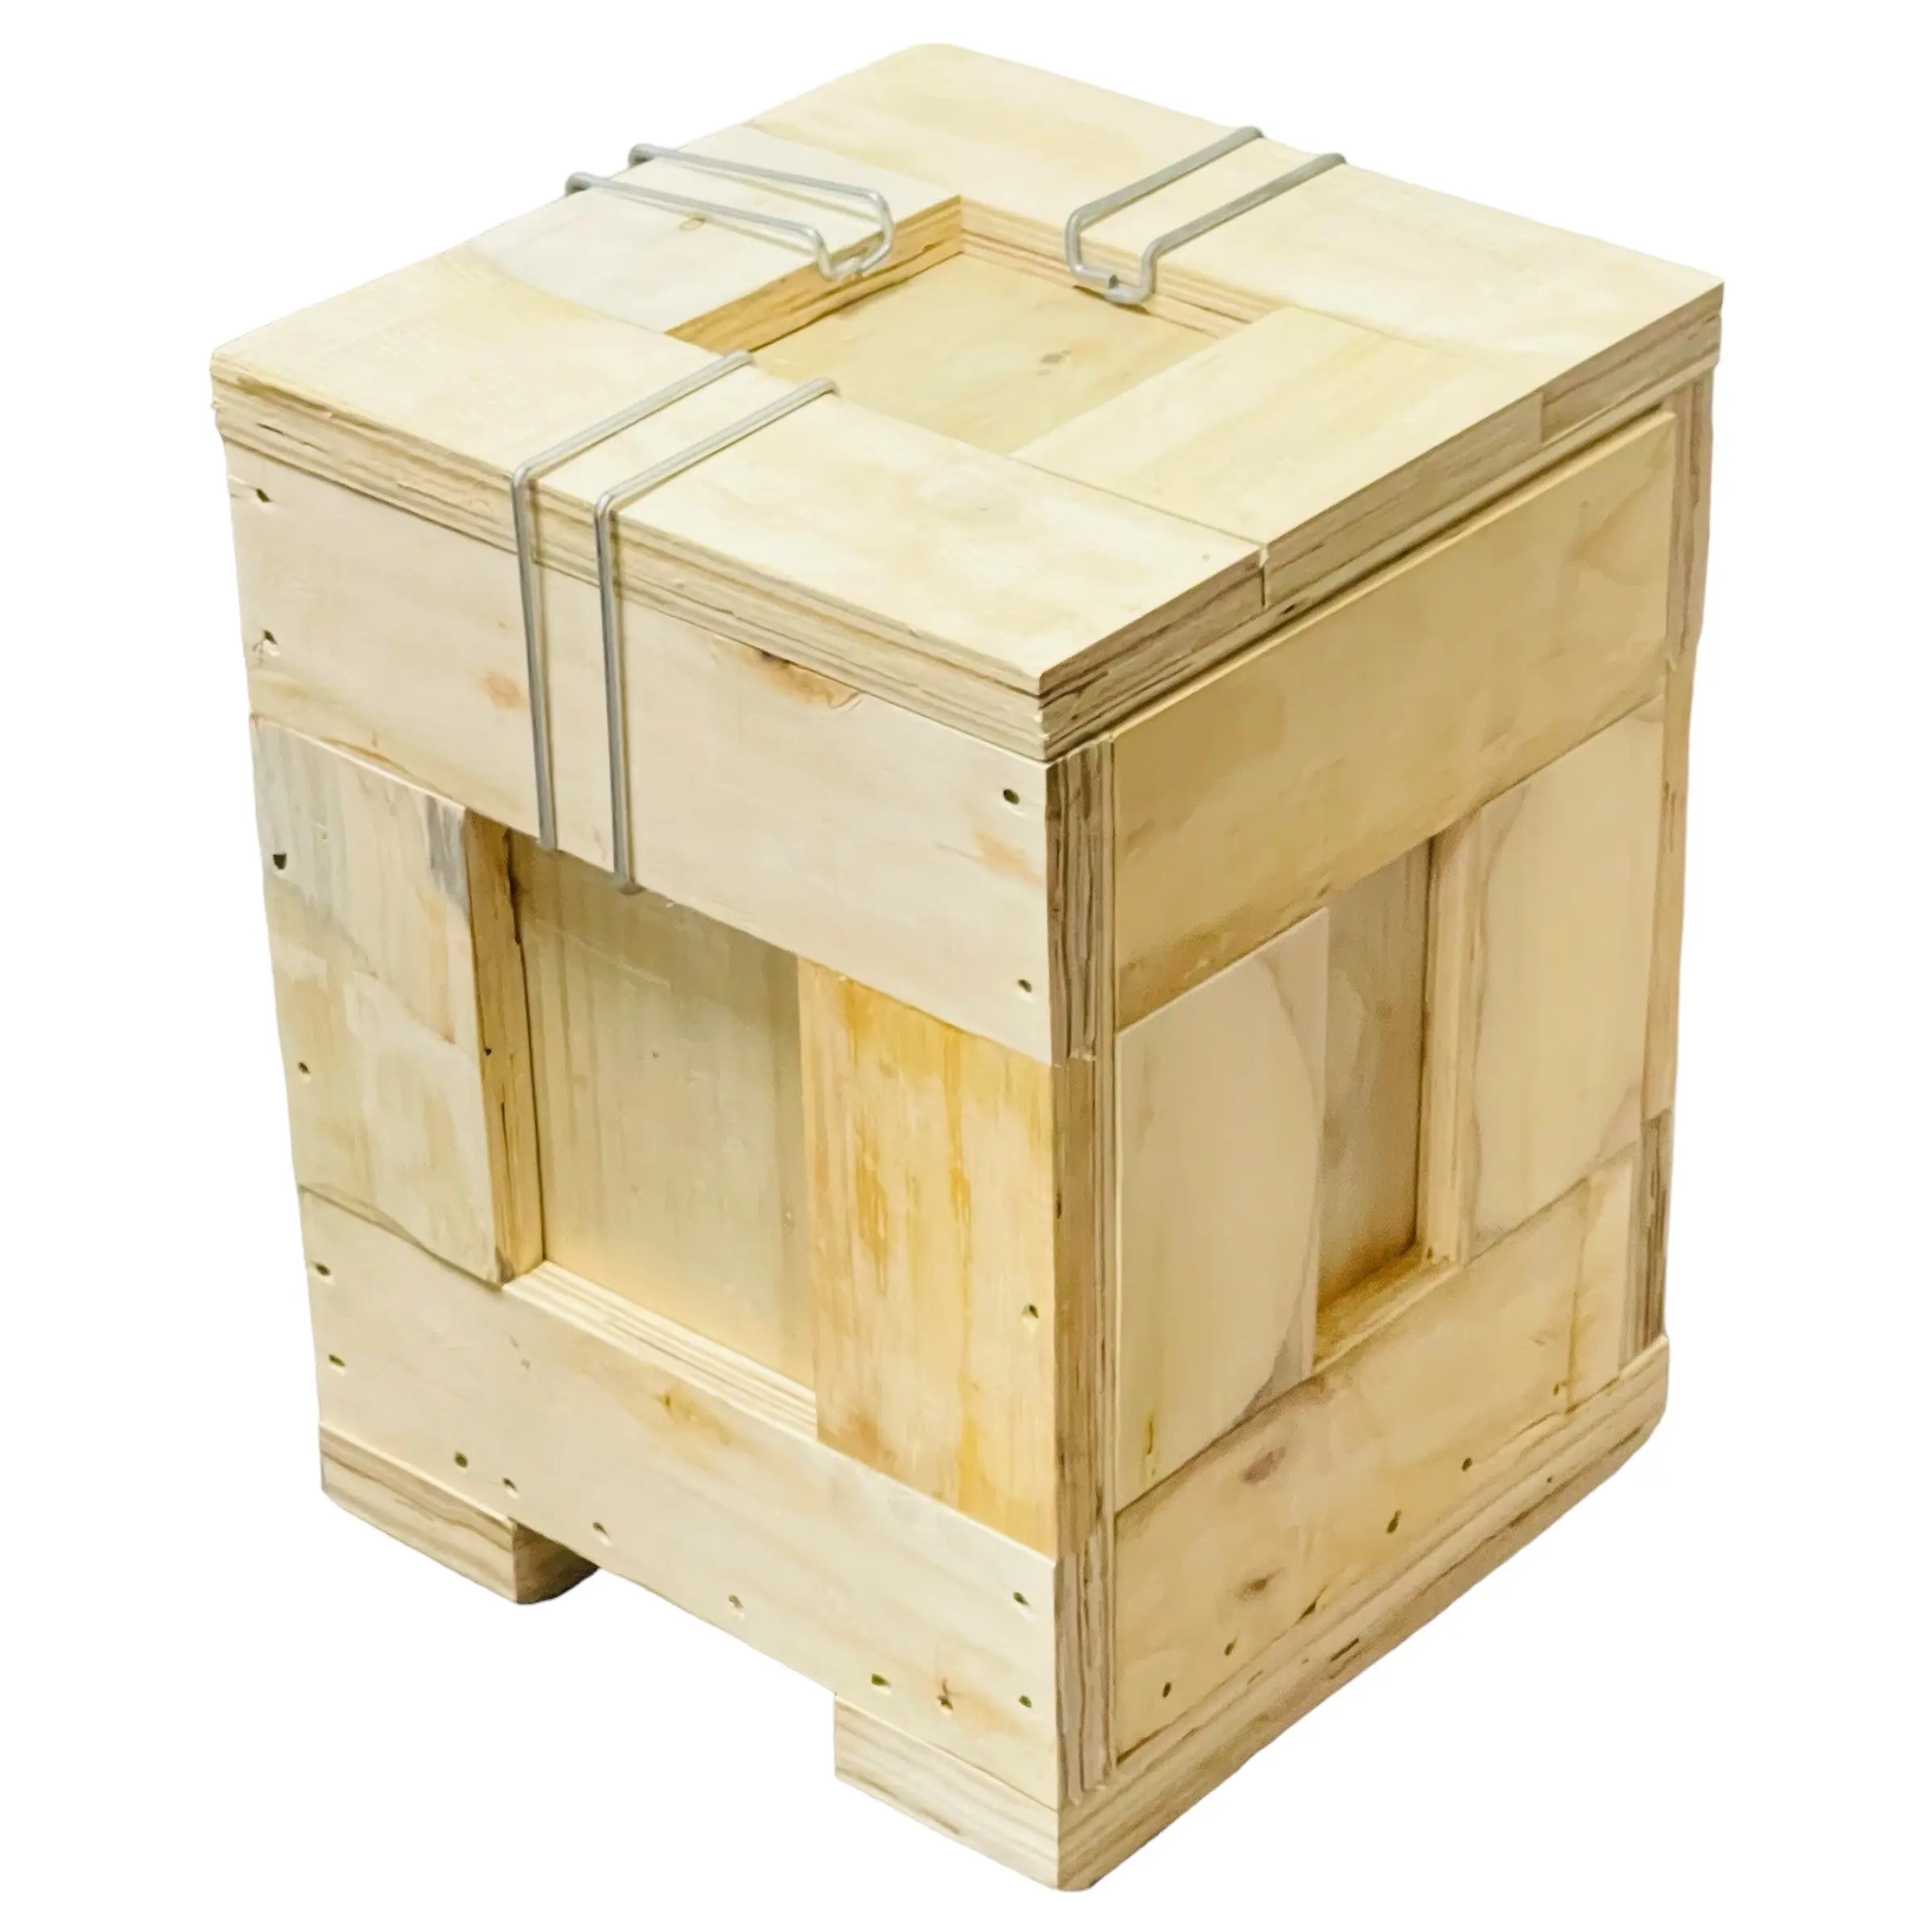 New Design Storage And Export Fumigated Wooden Crates Wholesale Cheap Wooden Crates Wholesale Made By Vietnam Manufacturer